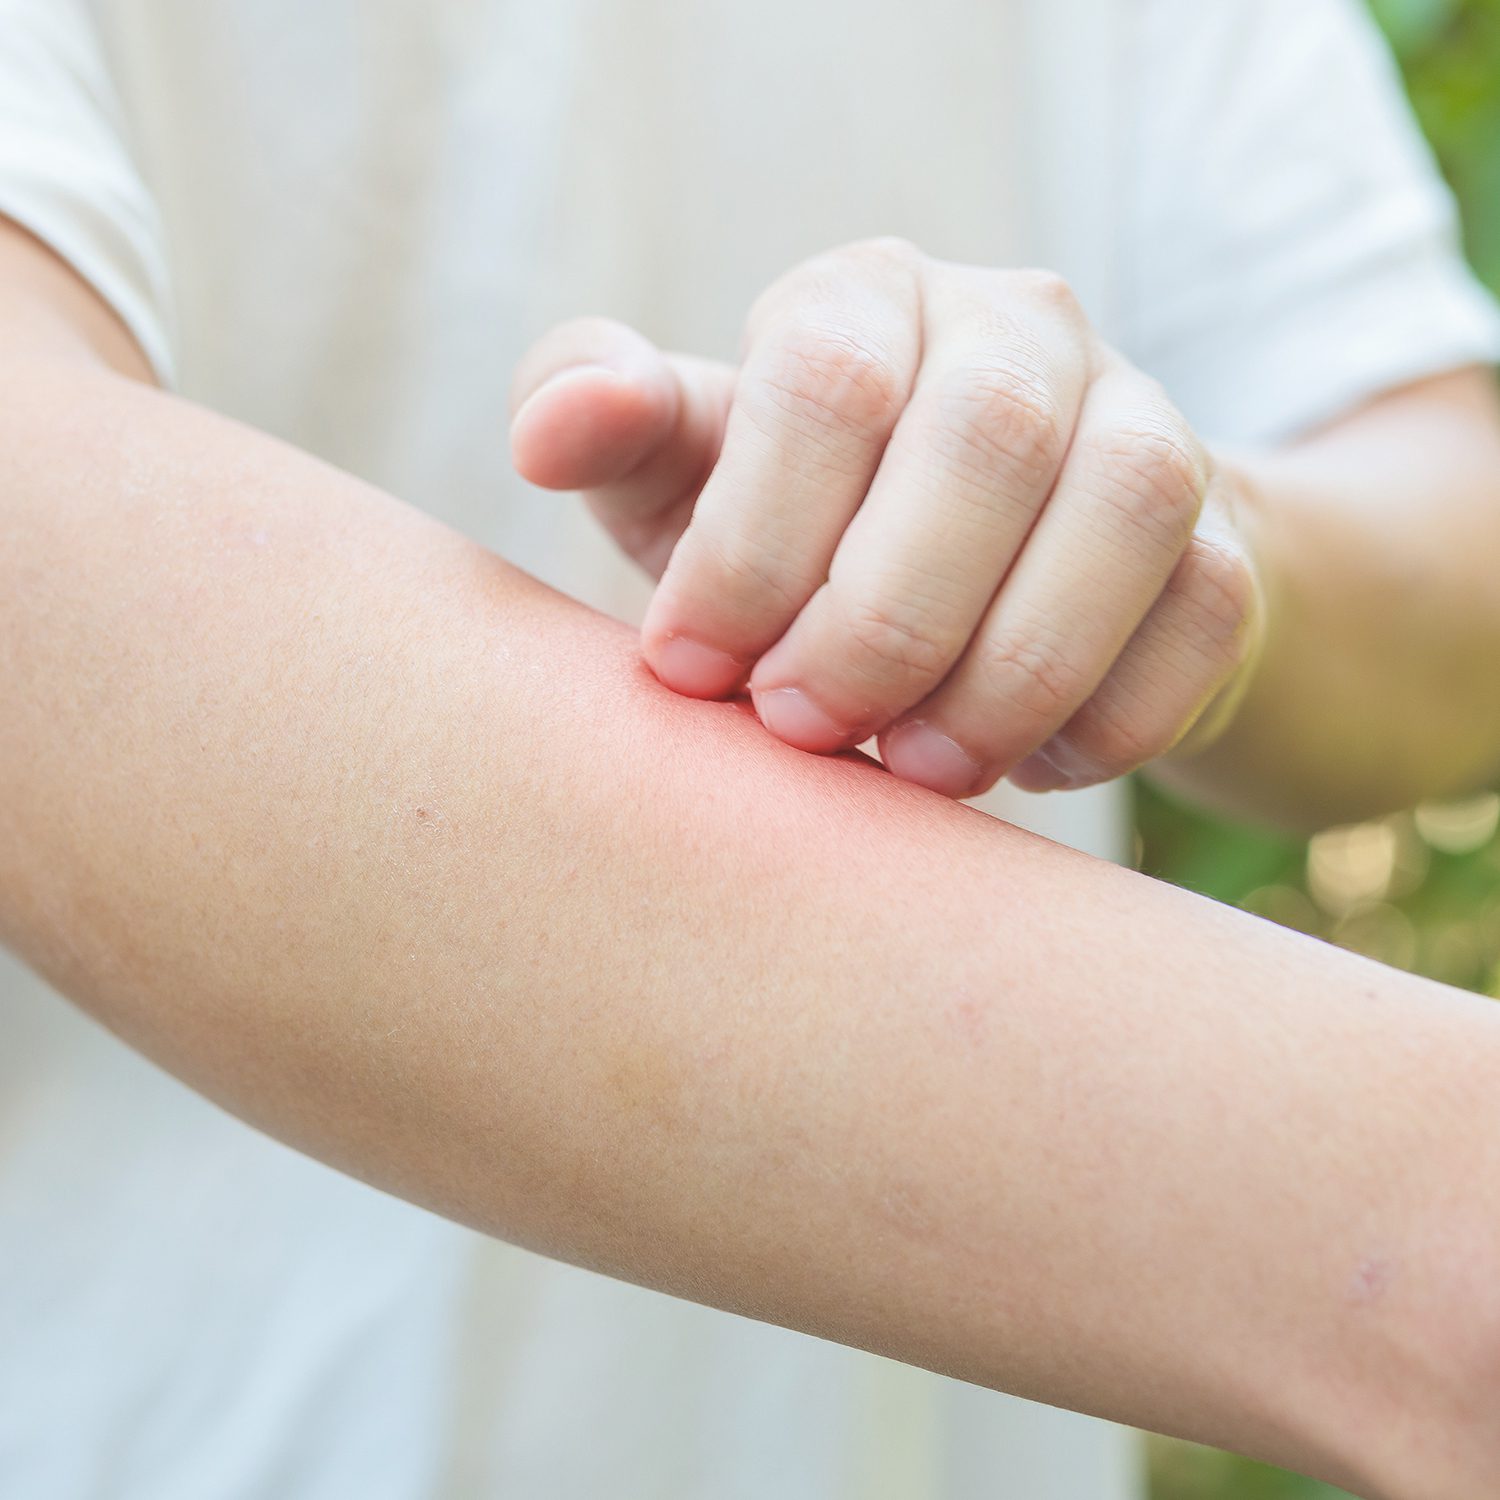  Insect Sting Allergies: 7 Natural Remedies for Insect Sting Allergies